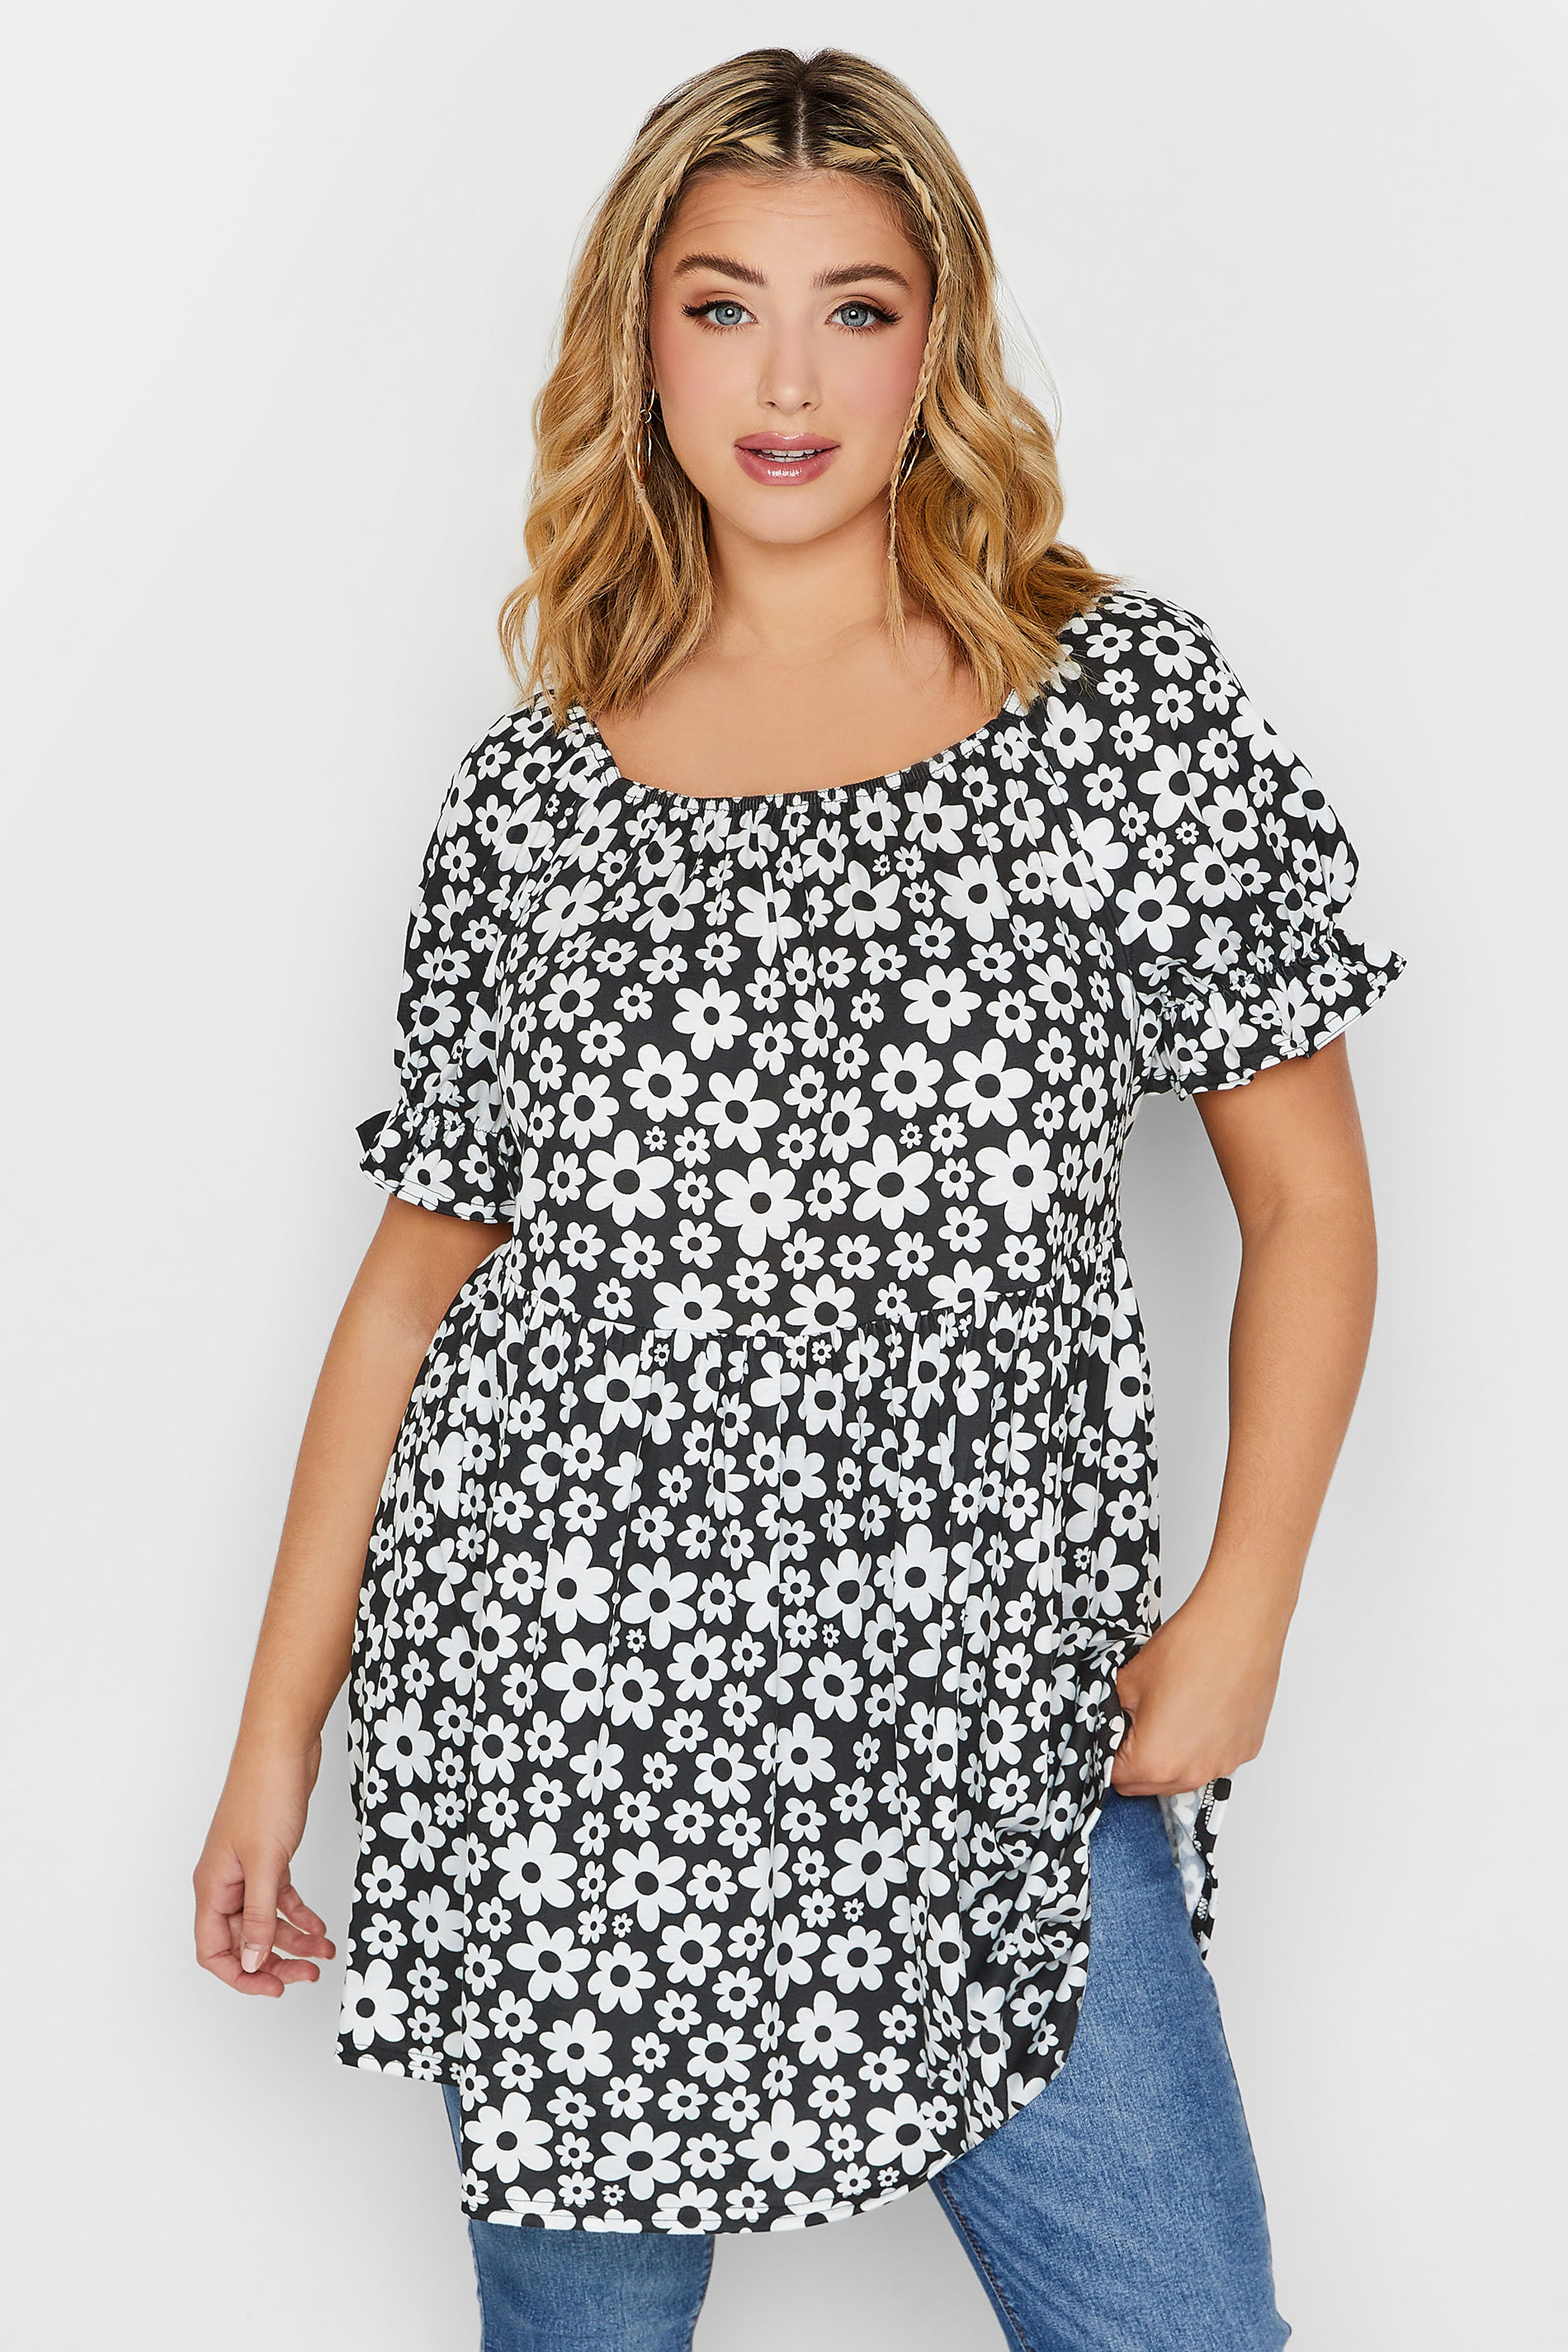 LIMITED COLLECTION Plus Size Black Retro Floral Print Top | Yours Clothing  1